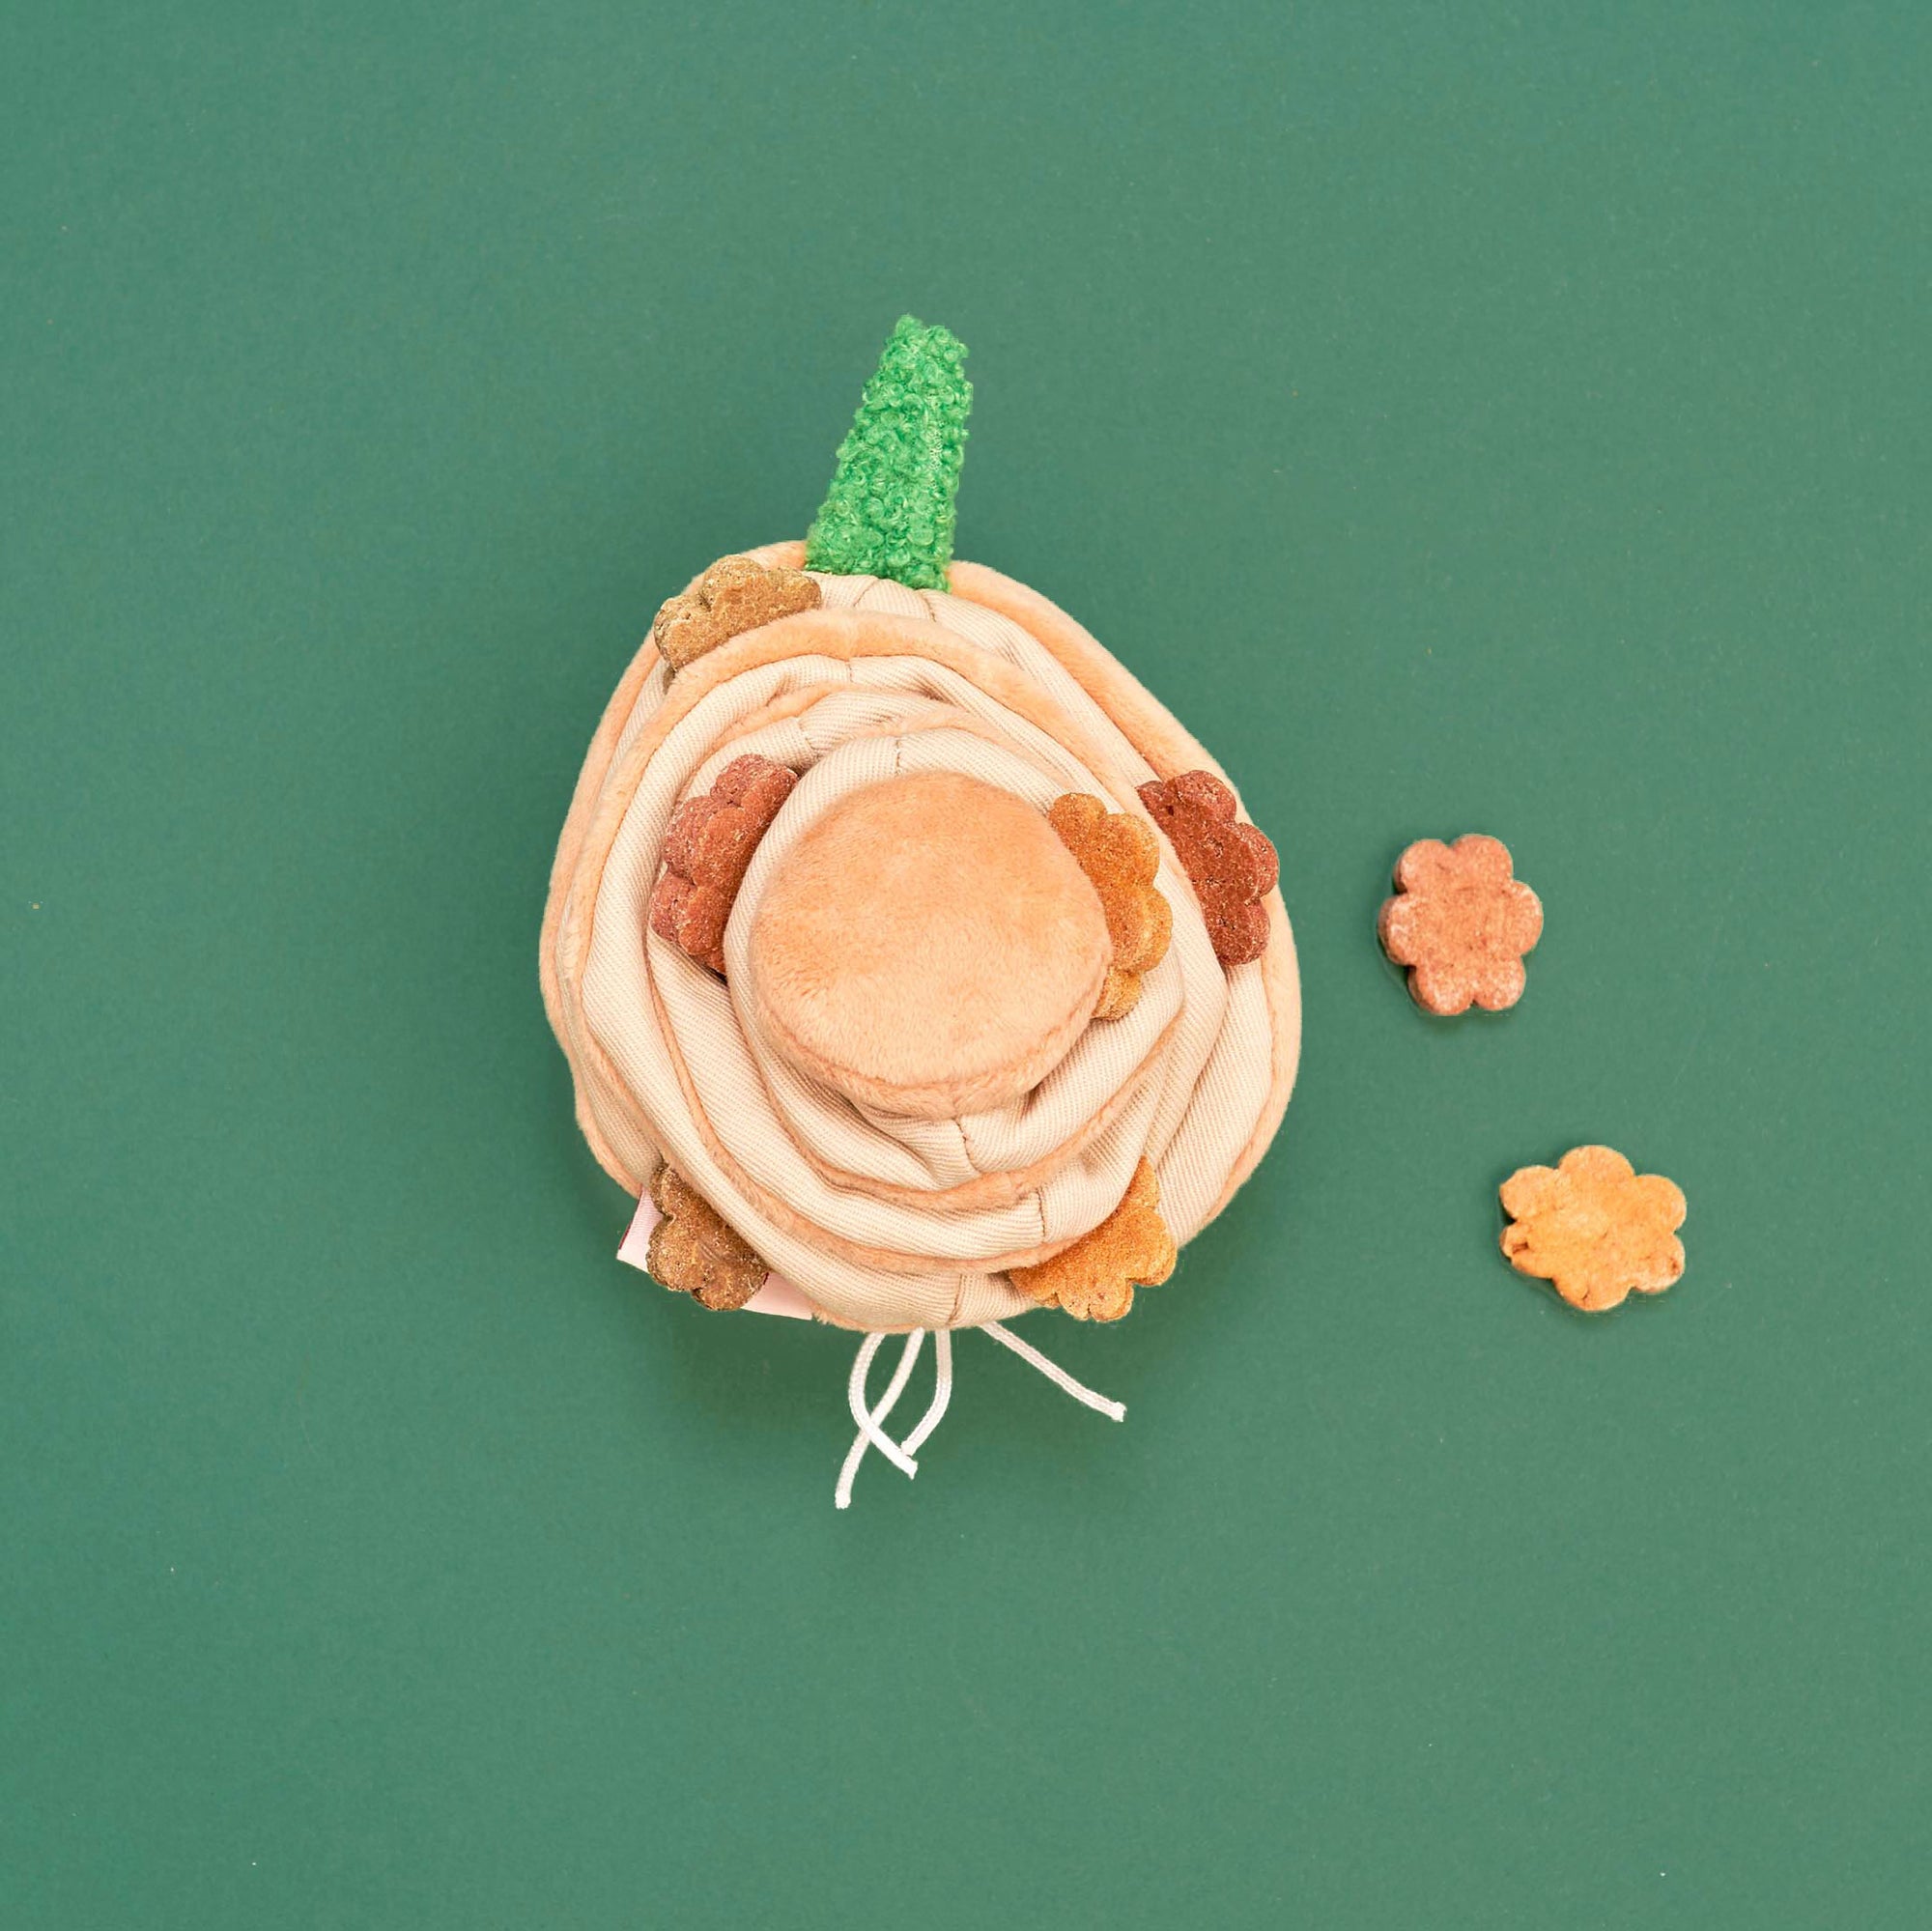 This is a neatly arranged image of a yellow onion-shaped dog toy with green leaves on top, against a green background. The toy is opened to reveal layers and compartments, with some dog treats placed around it, suggesting its use for interactive nosework or treat-finding games with pets. The color contrast and composition are visually appealing, emphasizing the toy's design and function.